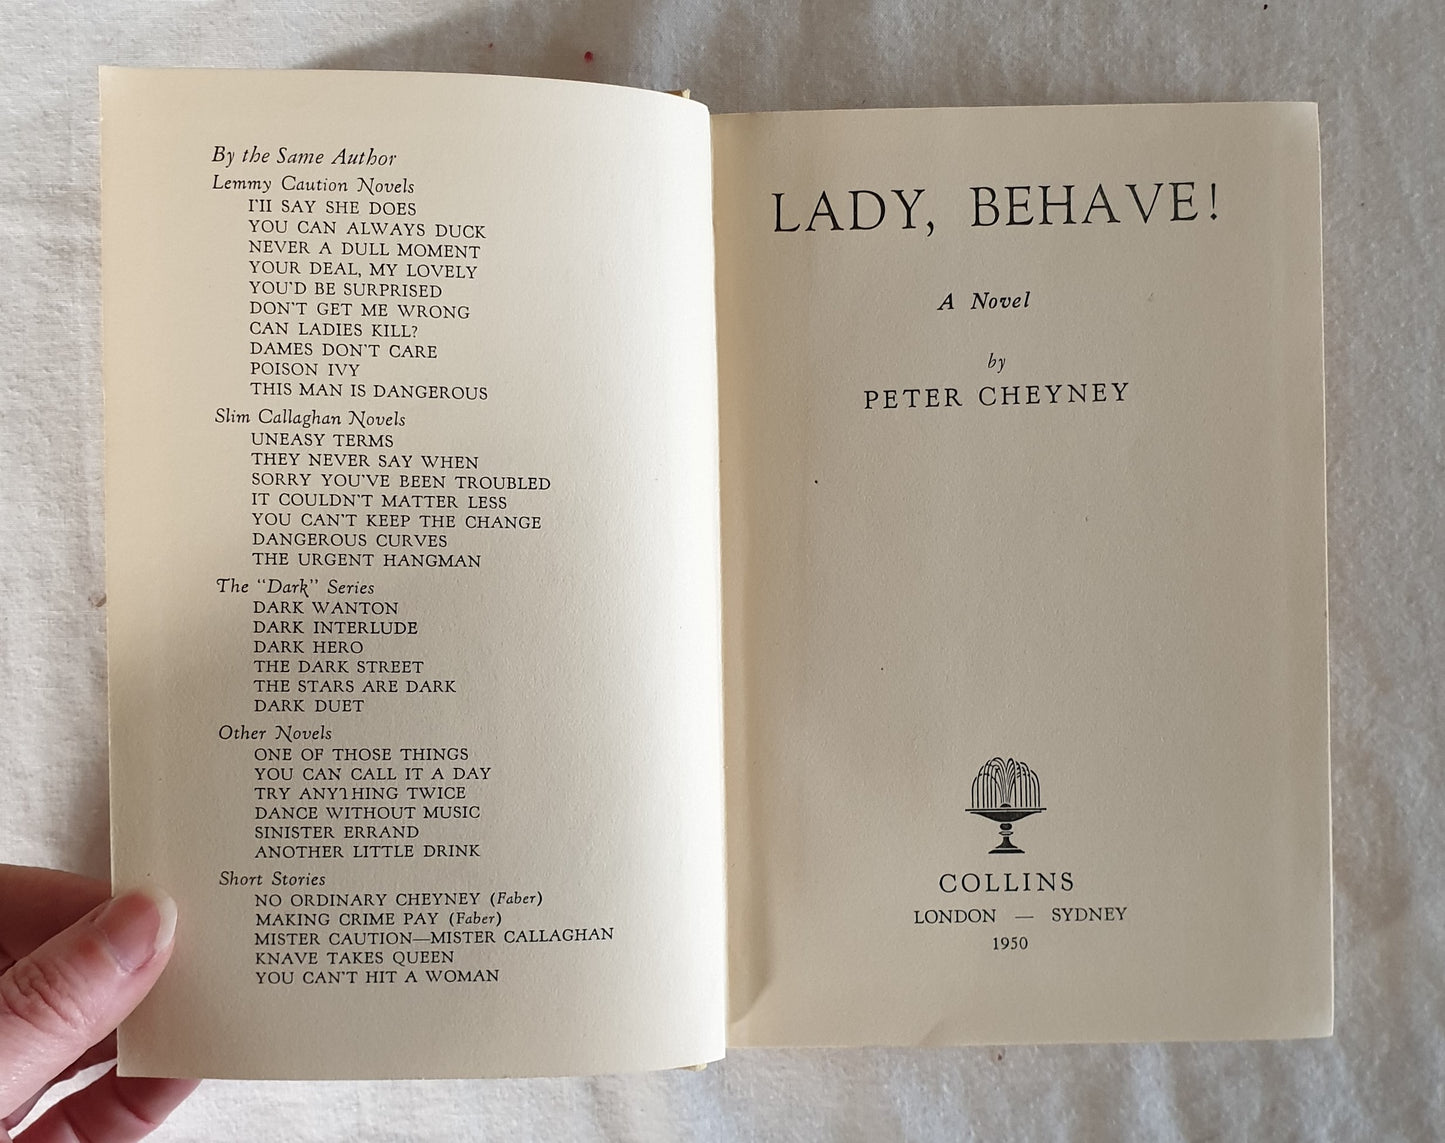 Lady Behave! by Peter Cheyney